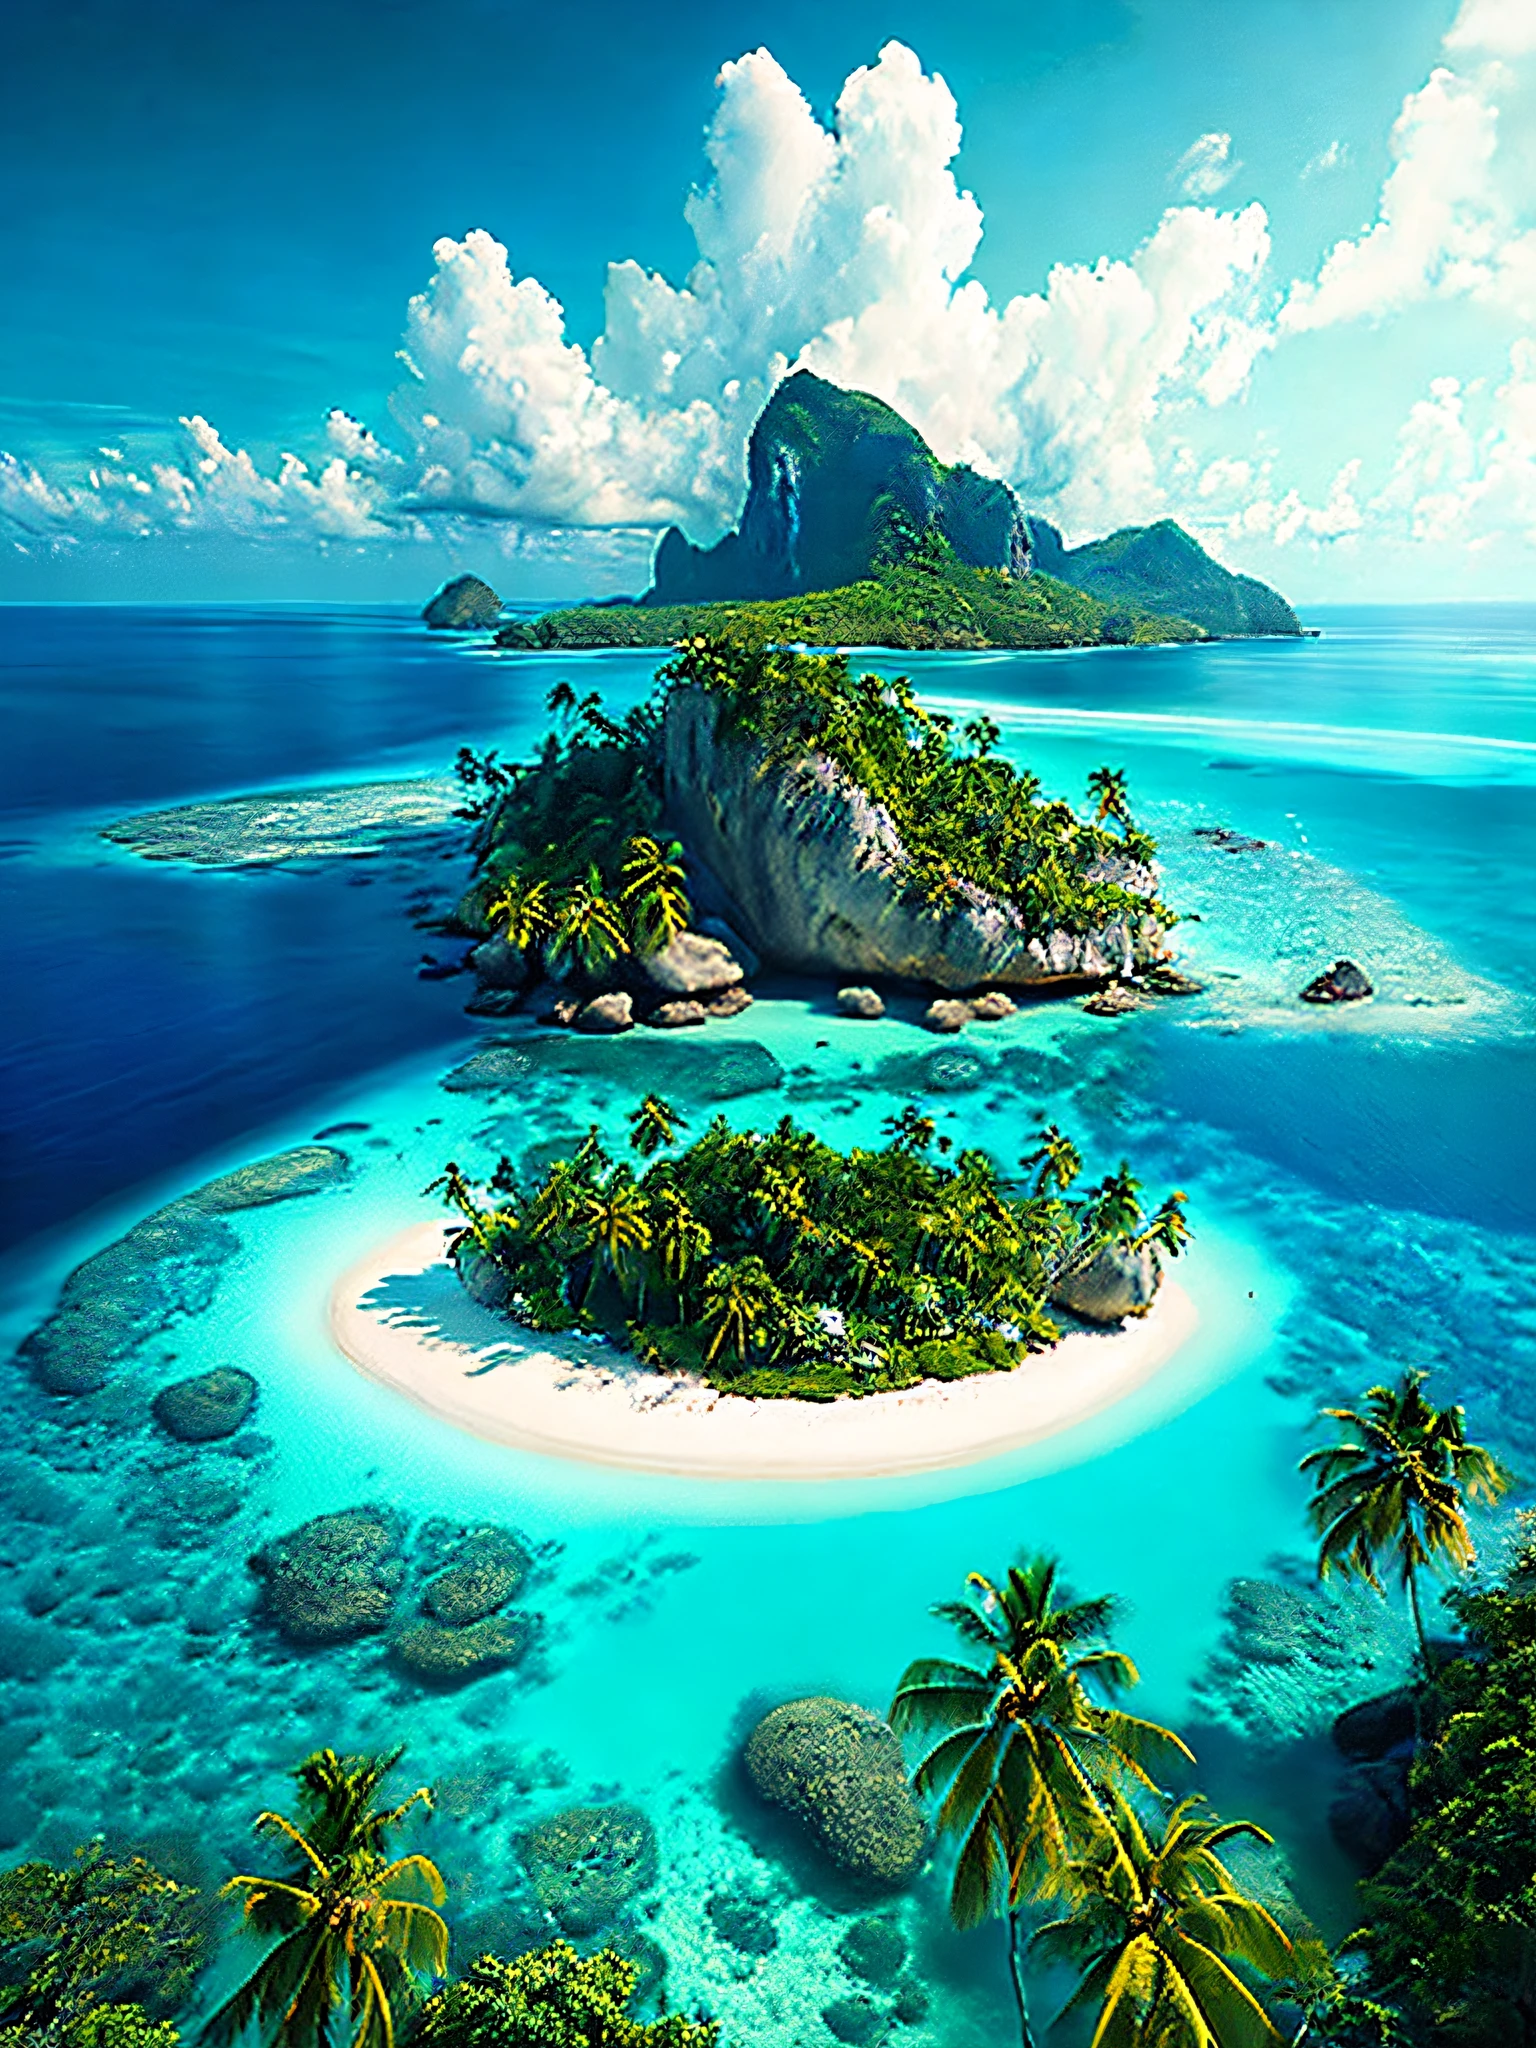 arafed island with palm trees and a sandy beach, tropical island, epic matte painting of an island, island in a blue sea, an island floating in the air, an island, island landscape, island floating in the sky, island background, monsoon on tropical island, island in the background, floating island, tropical location, island, island with cave, many islands, no humans, tree, cloud, sky, outdoors, scenery, day, palm tree, ocean, water, beach, blue sky, horizon, cloudy sky, nature, sand